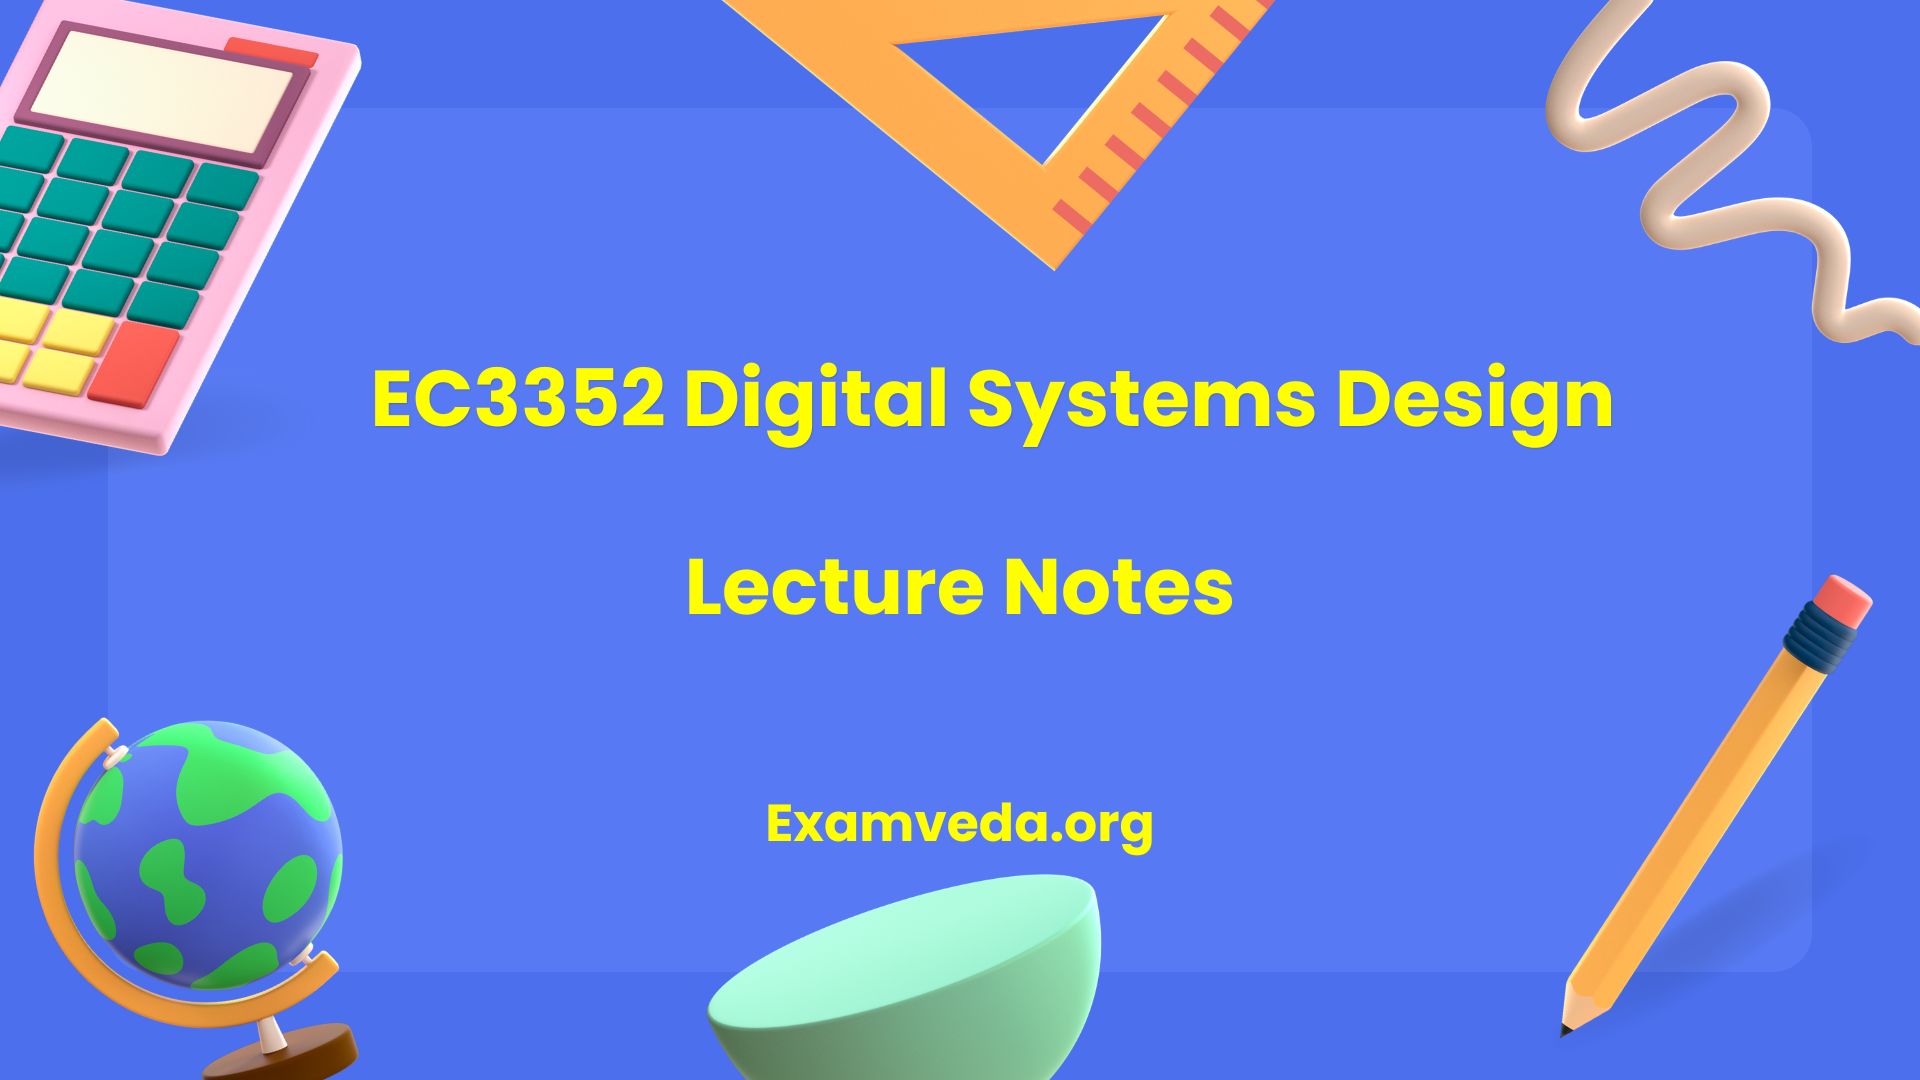 EC3352 Digital Systems Design Lecture Notes